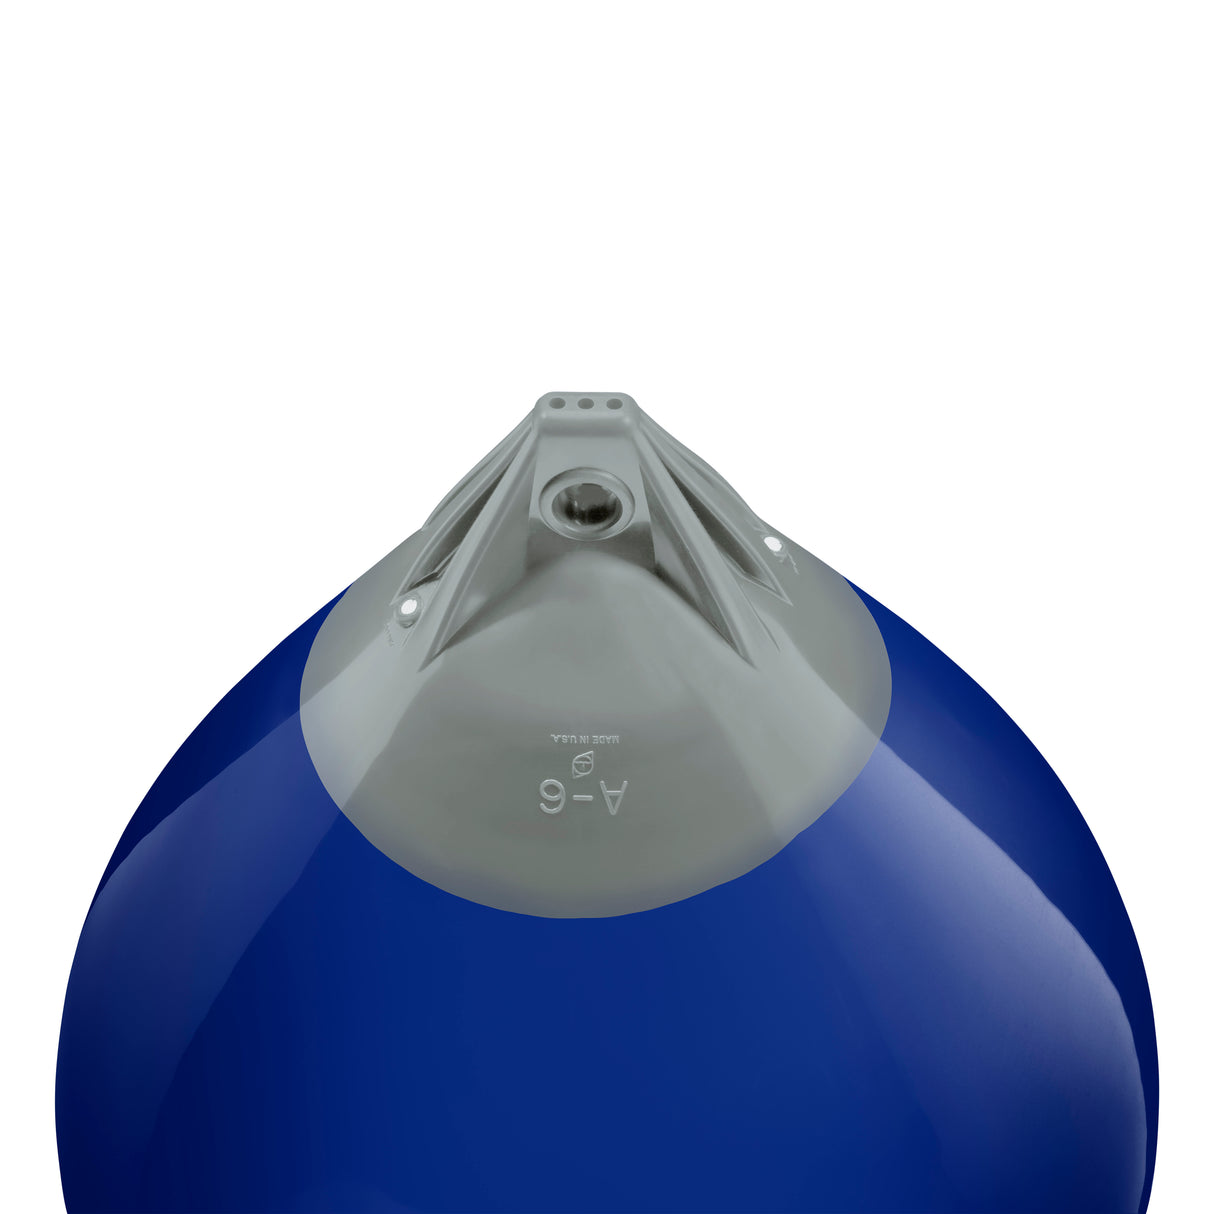 Cobalt Blue buoy with Grey-Top, Polyform A-6 angled shot